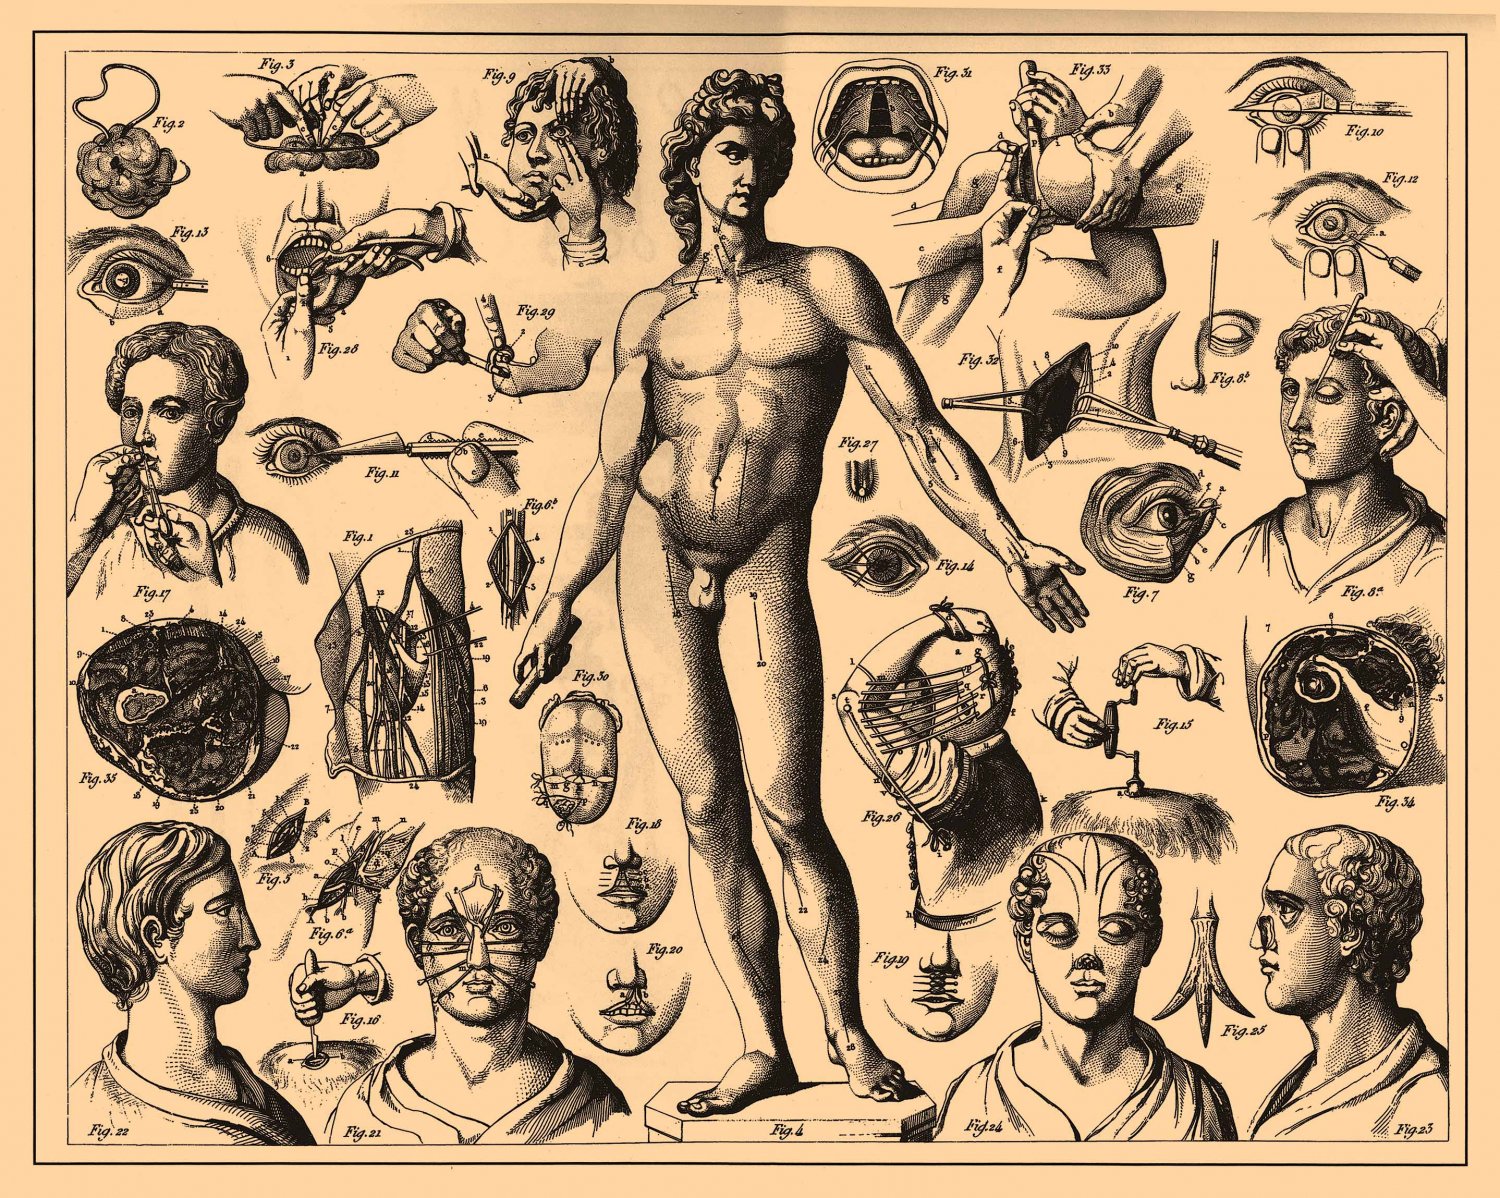 Brockhaus and Efron Encyclopedic Dictionary Chart 18"x28" (45cm/70cm) Poster